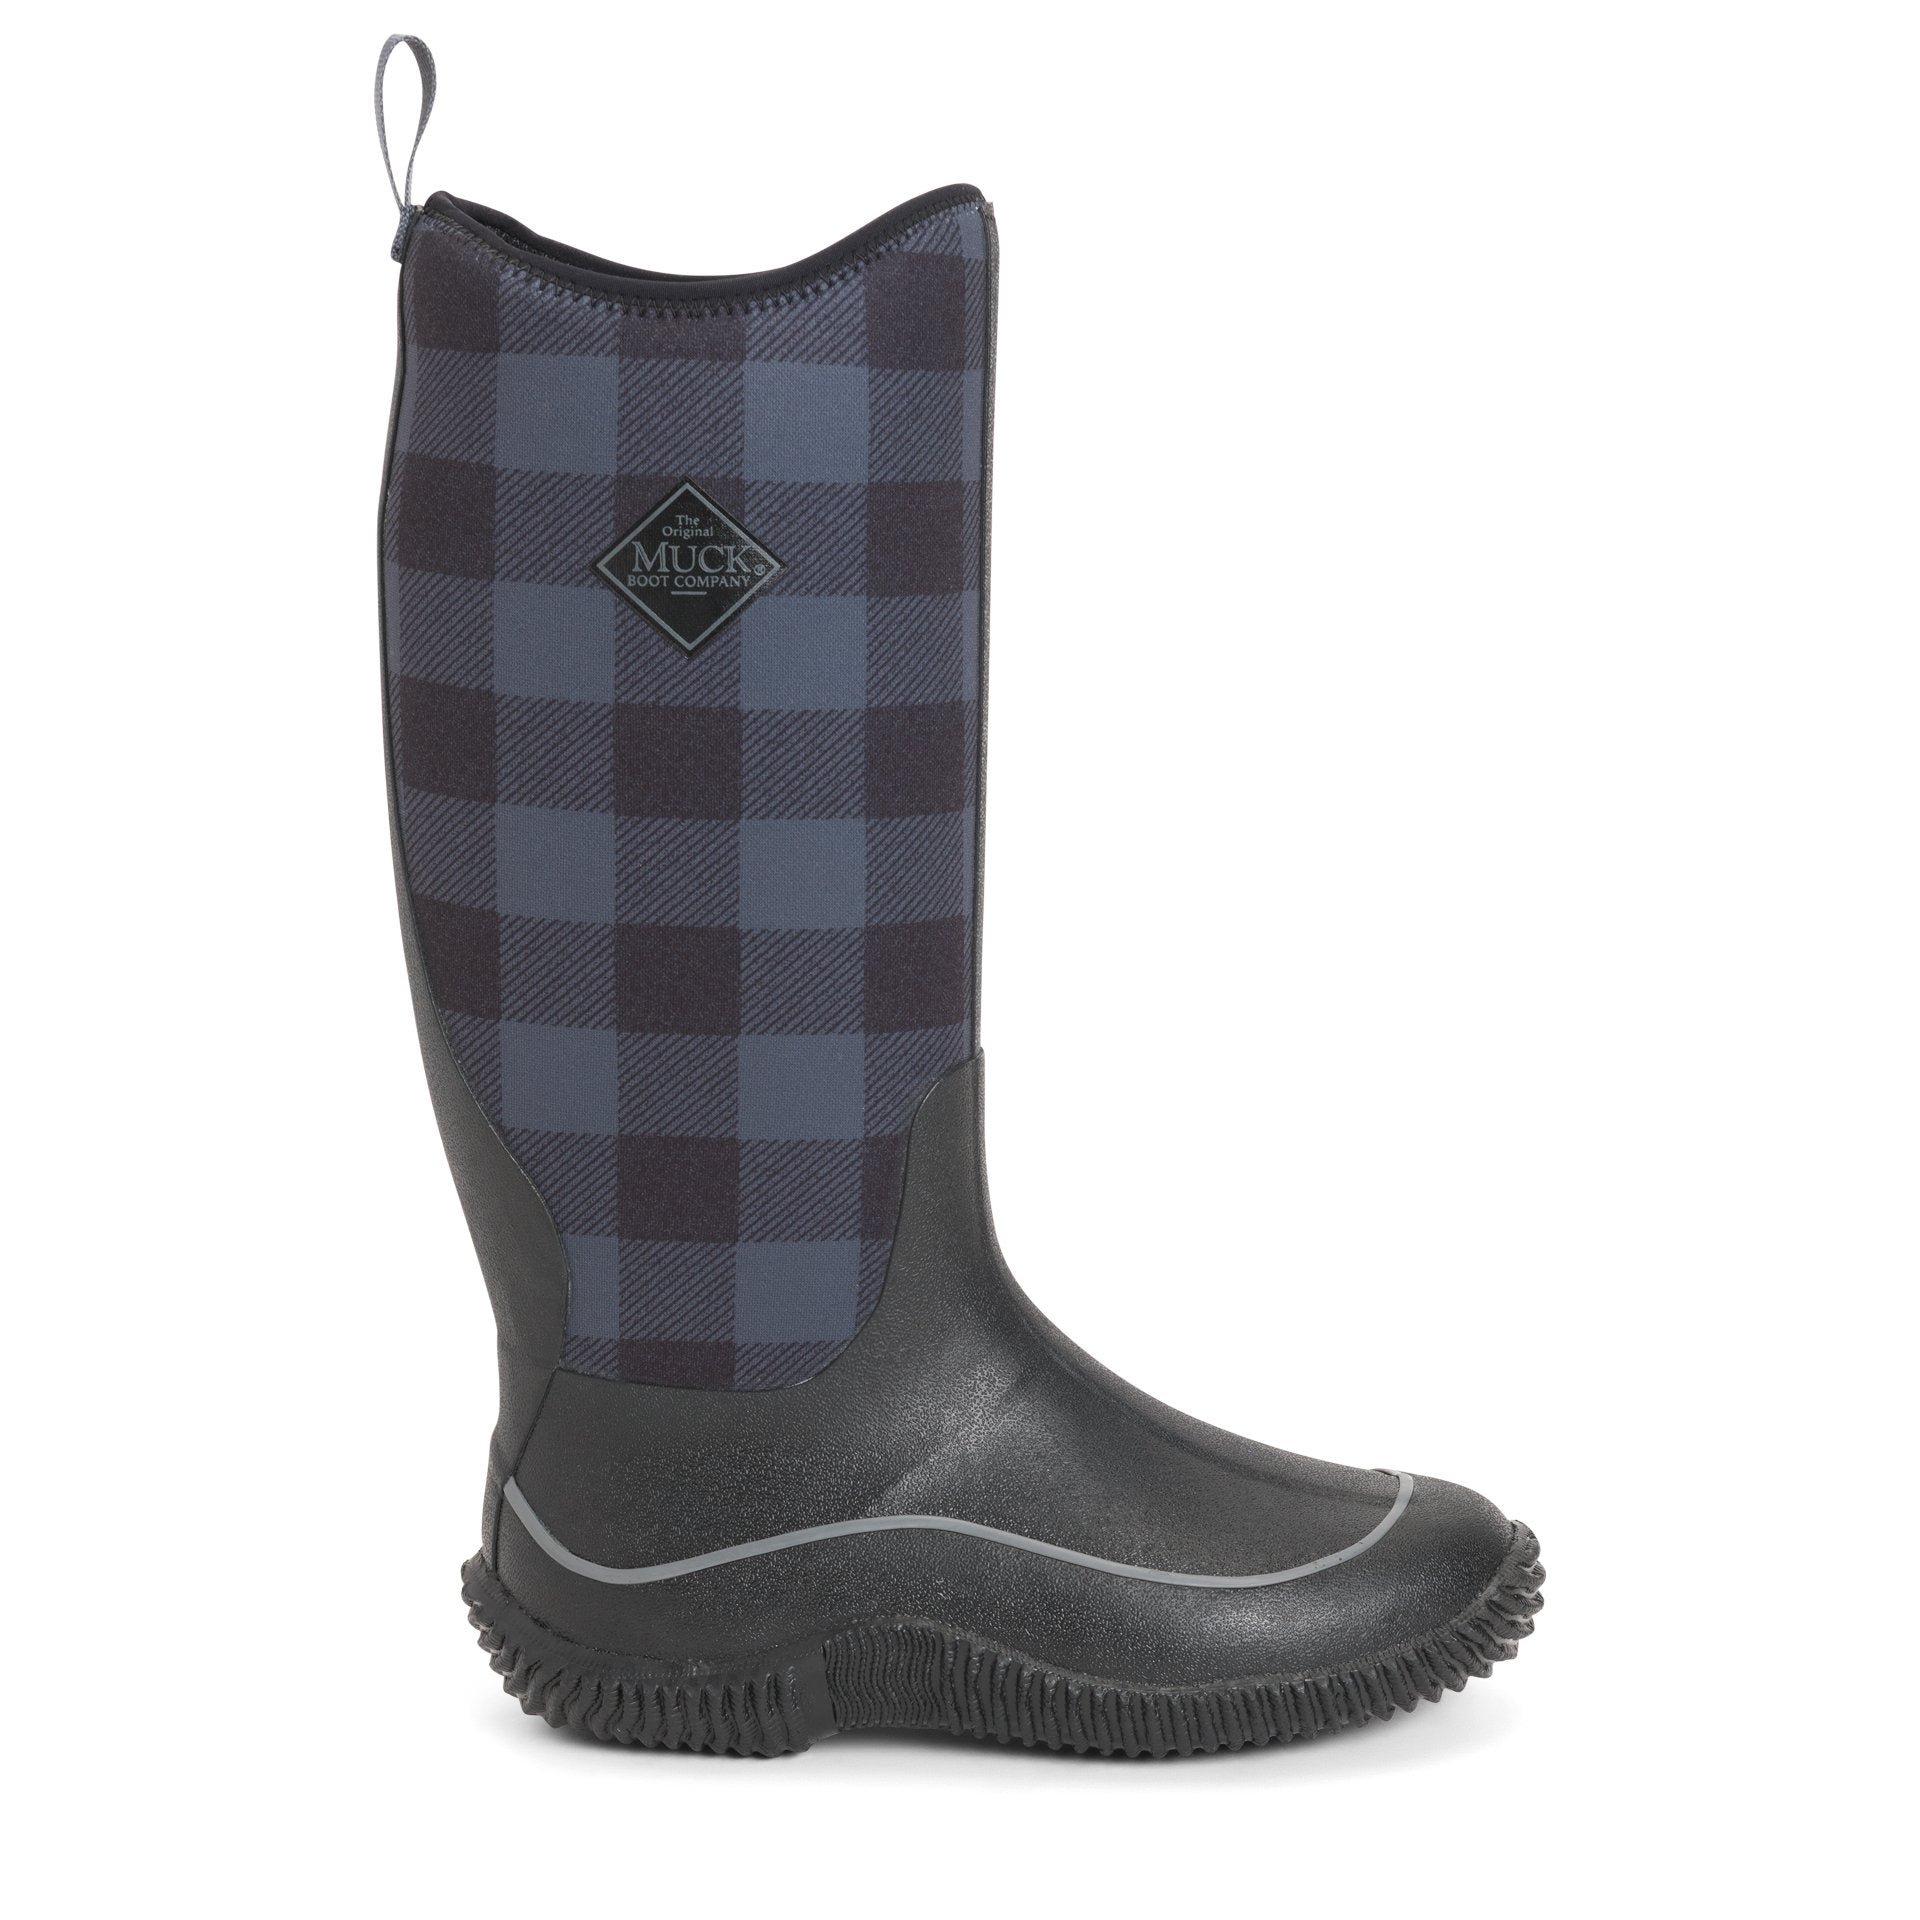 checkered boots womens